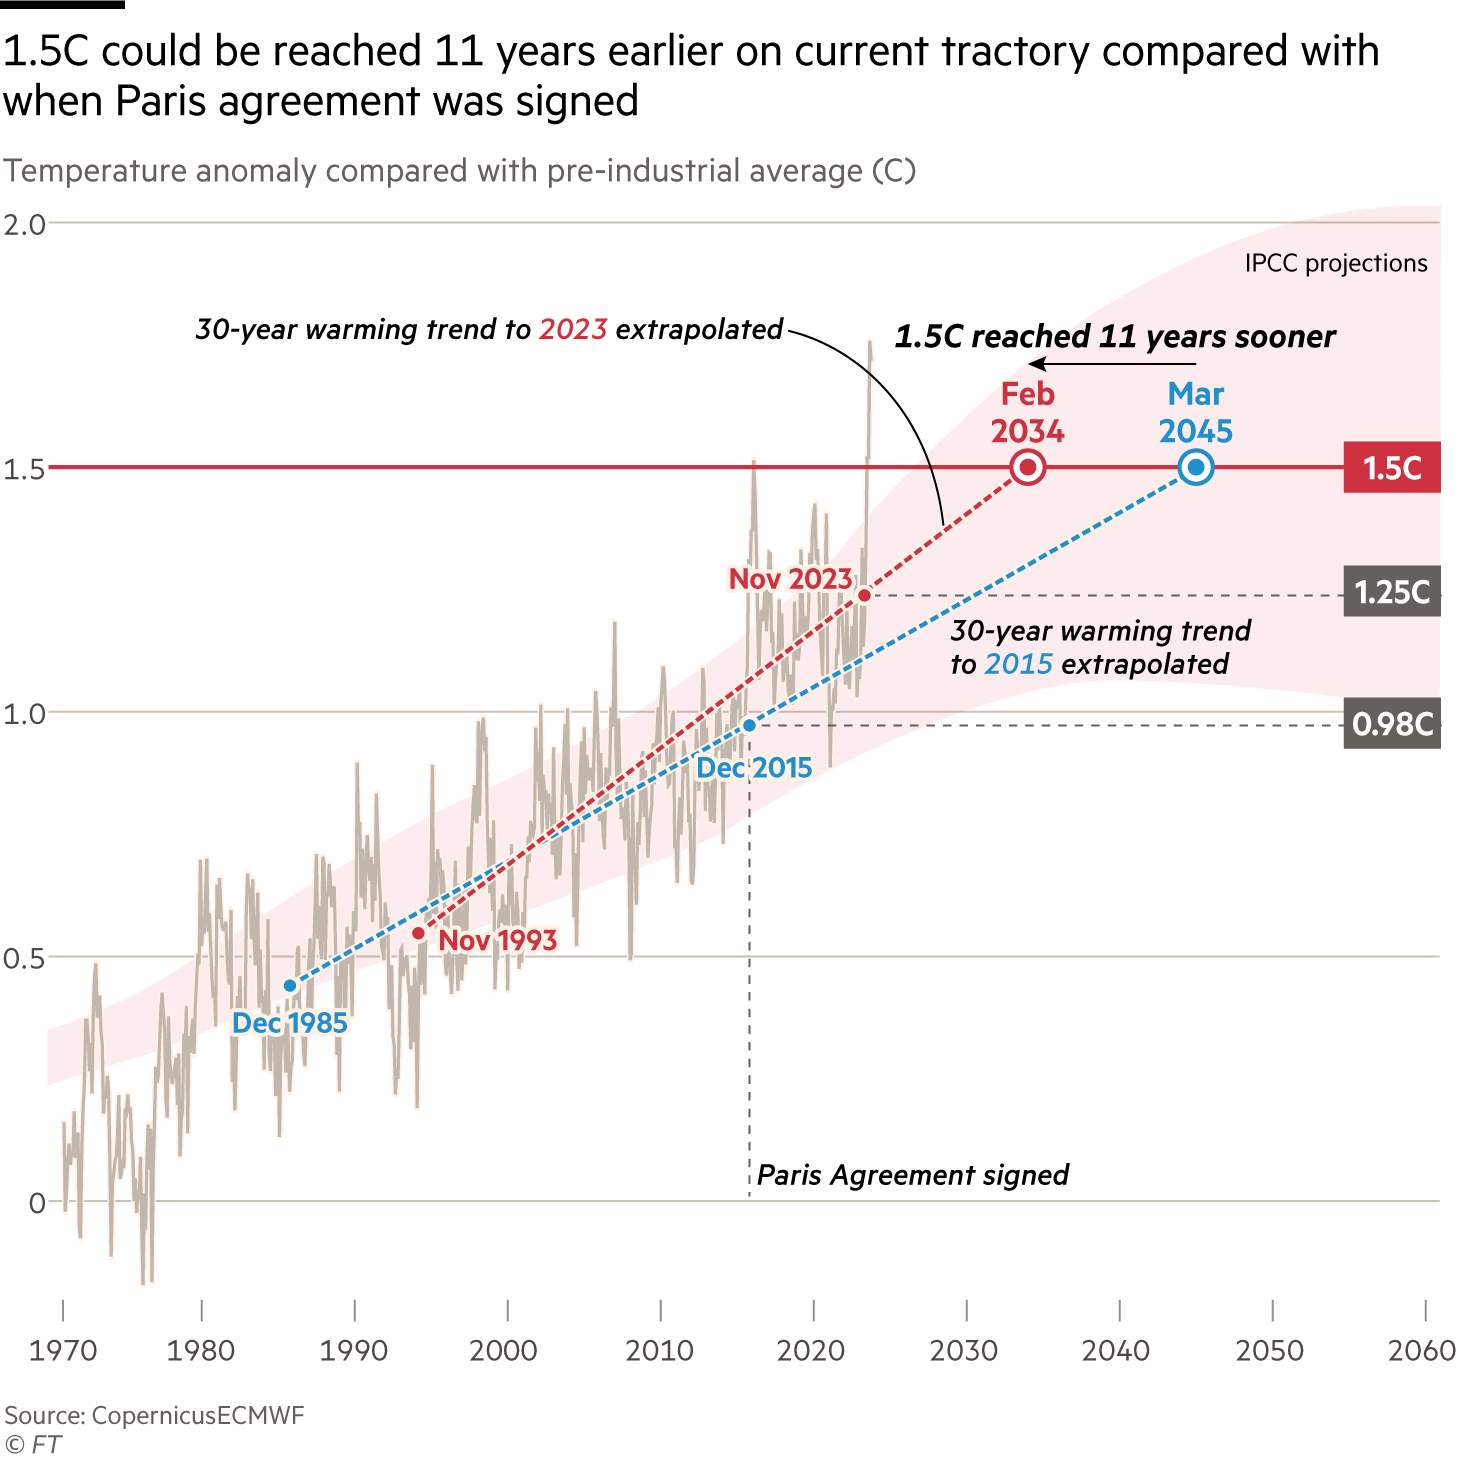 1.5C could be reached 11 years earlier on current tractory compared with when Paris agreement was signed. Chart showing temperature anomaly compared with pre-industrial average (C). If the 30-year warming trend leading up to Paris Agreement in 2015 continued, 1.5C would be breached by March 2045. However, if the same extrapolation was made in November 2023 global warming would breach 1.5C by February 2024, 11 years sooner.